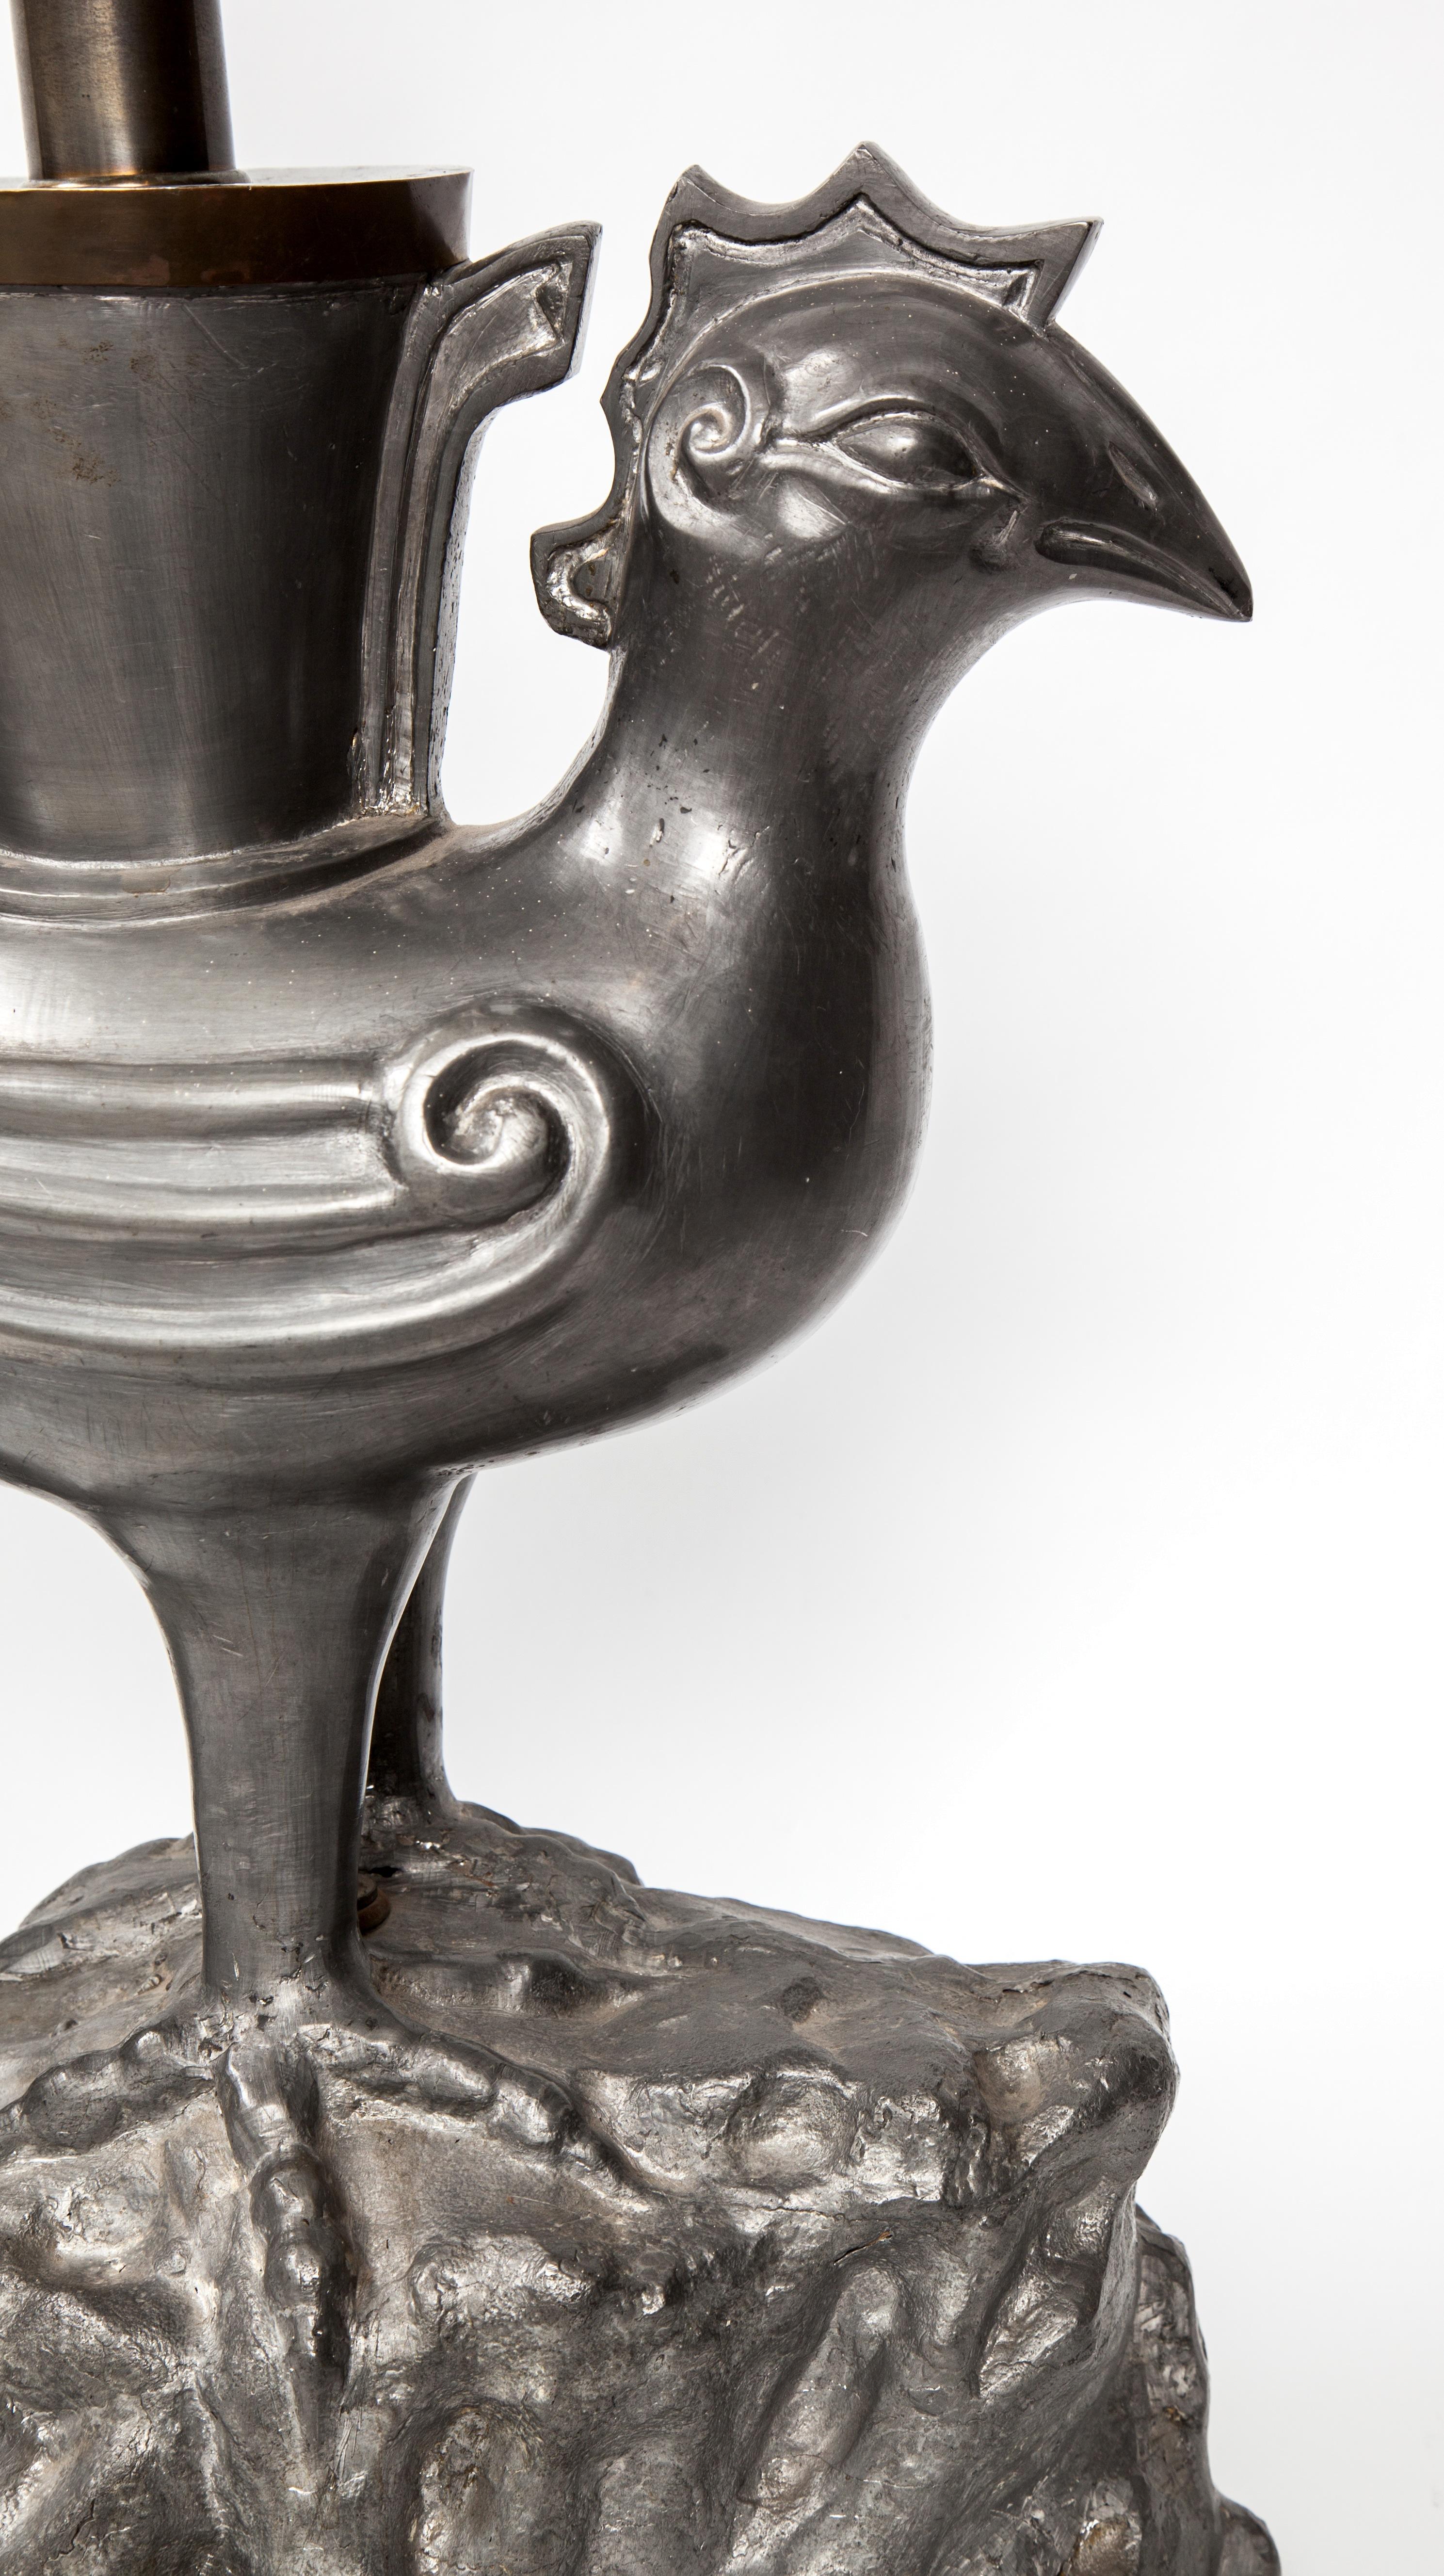 Superb and Dramatic 1970s On the Rocks, bird lamp in pewter and brass. This piece is so unique from it's size and scale to it's over the top sculptural design and subtle use of mixed metals. Unsigned.

Measures: The height to the top of the bird is